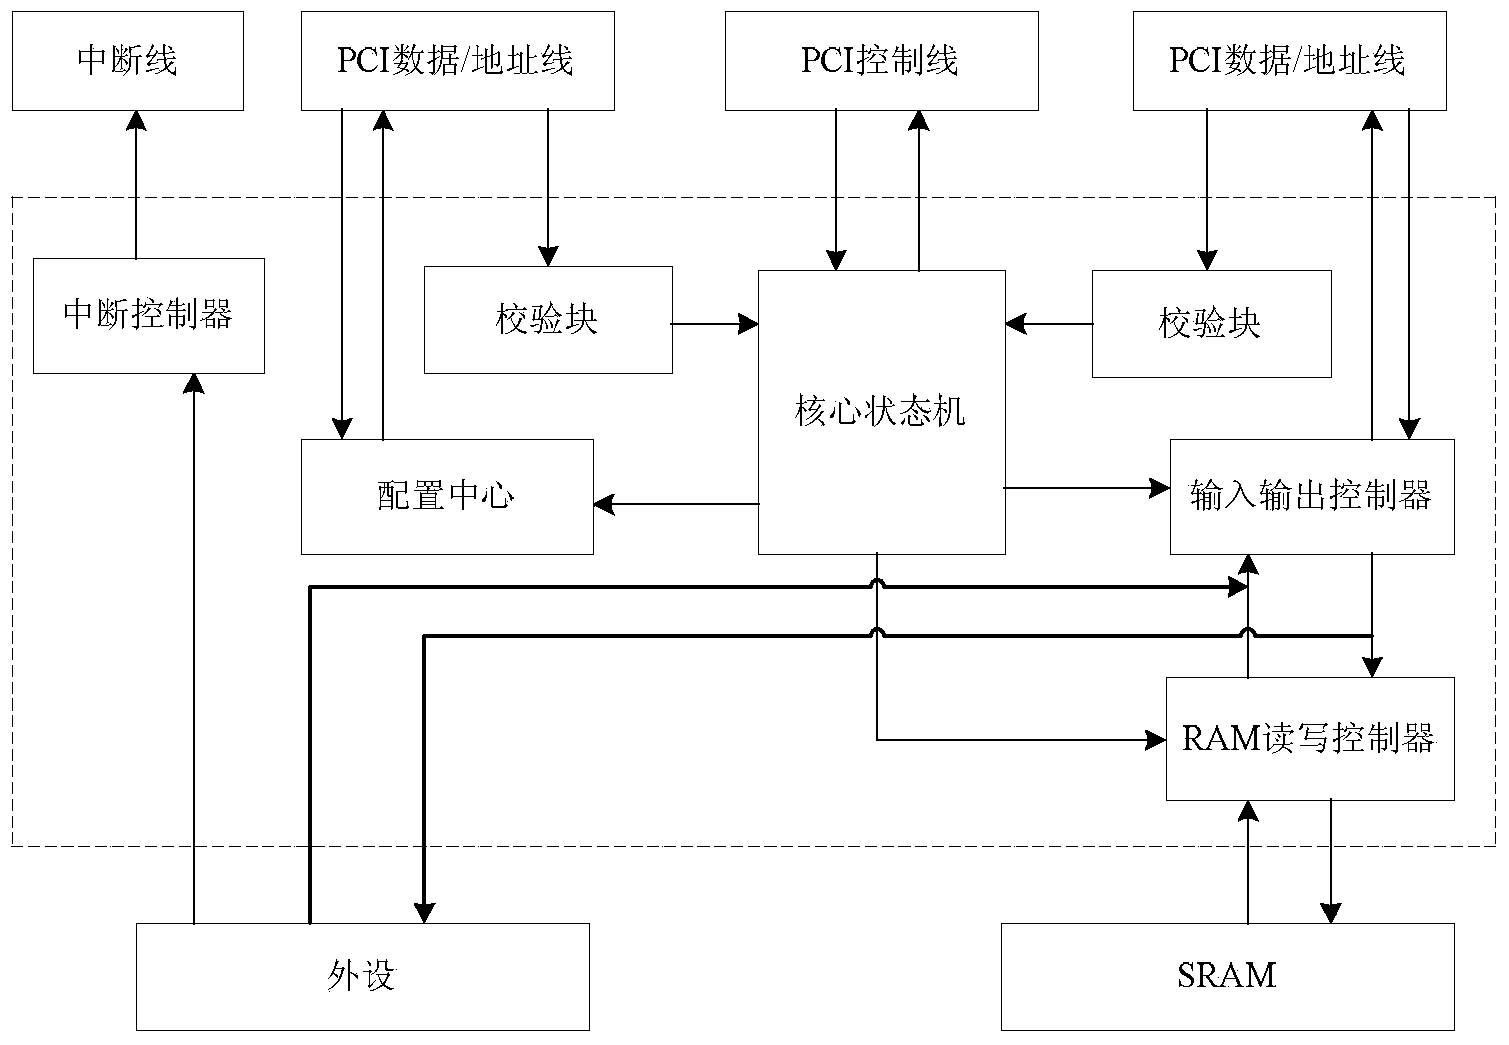 PCI (peripheral component interconnect) slave unit core control module applied to high-speed motion control system